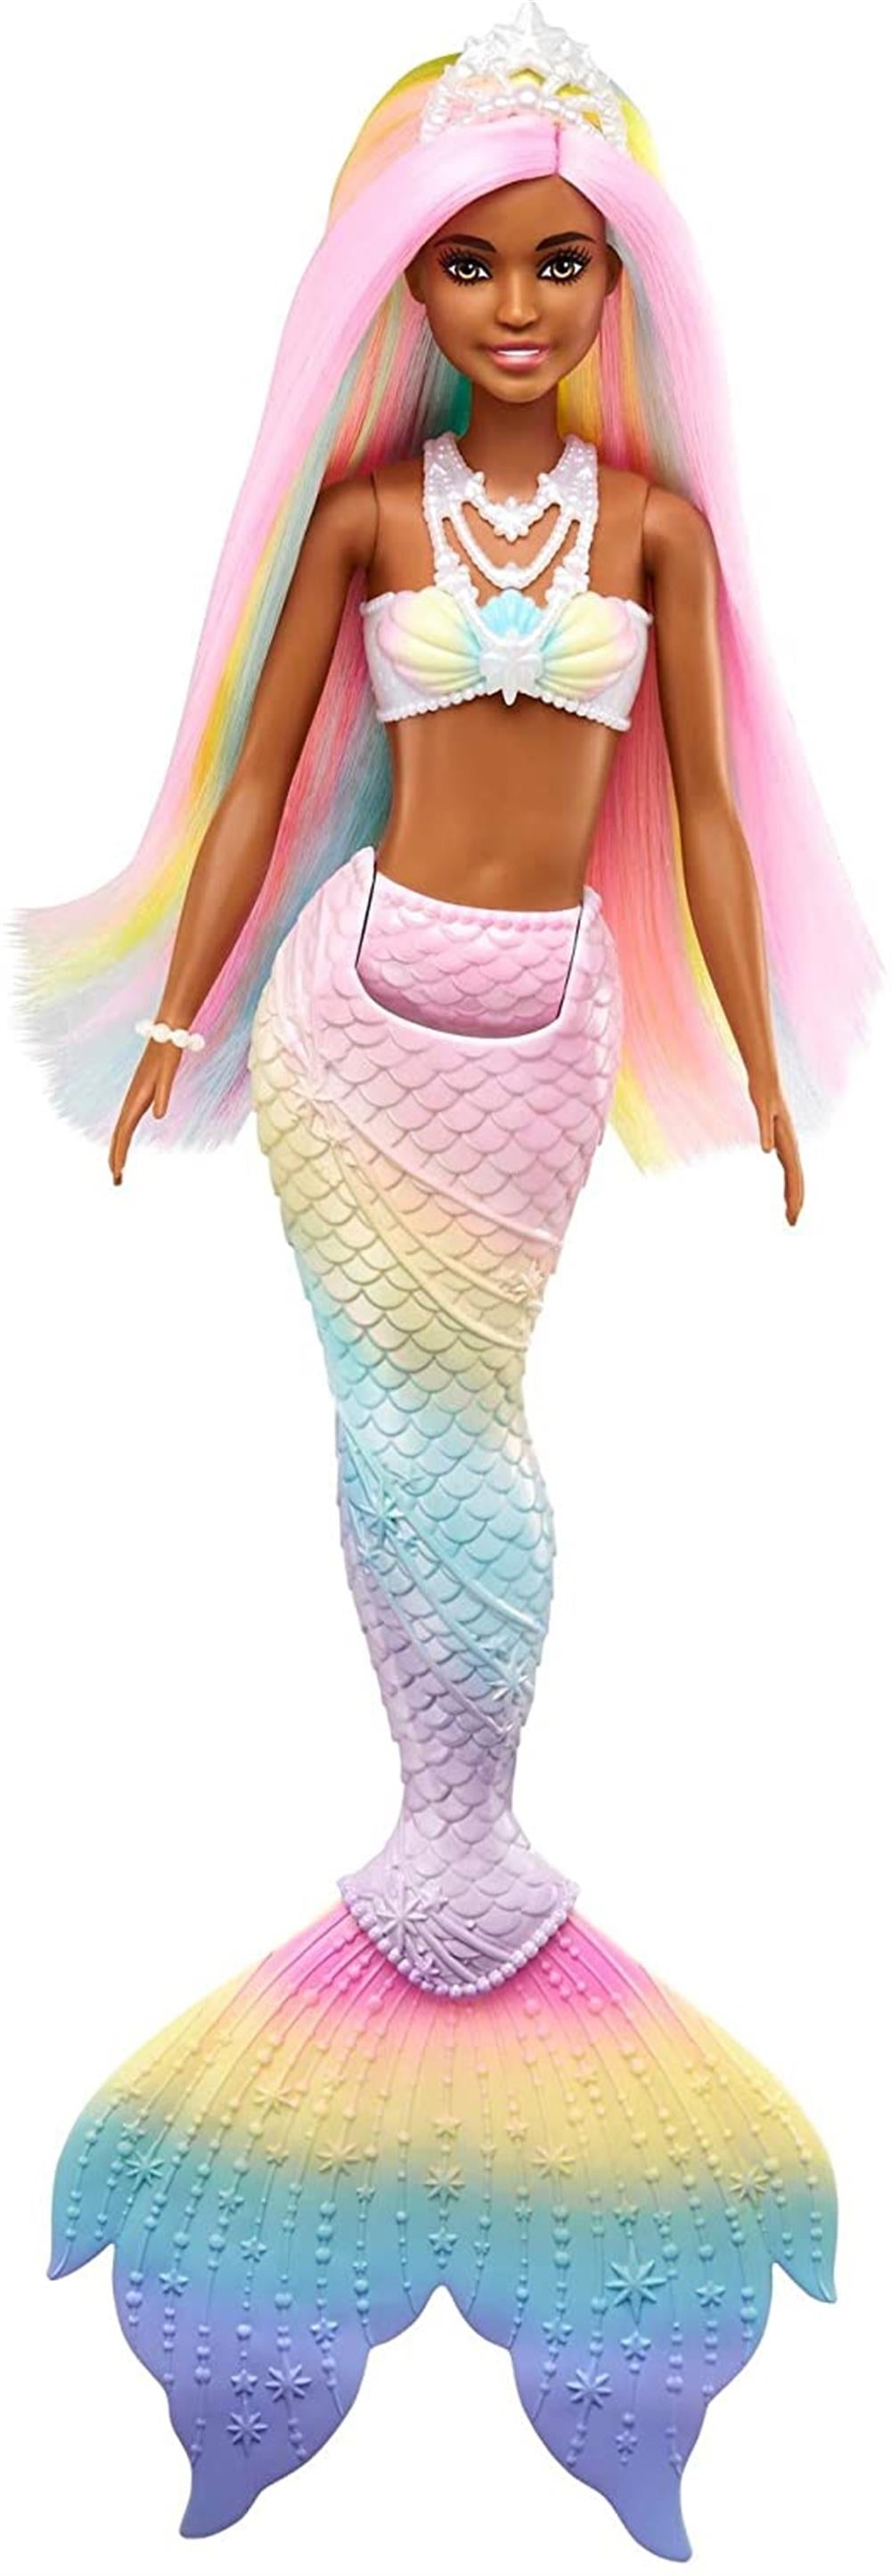 Barbie Dreamtopia Rainbow Magic Mermaid Doll with Rainbow Hair and Water-Activated Color Change Feat